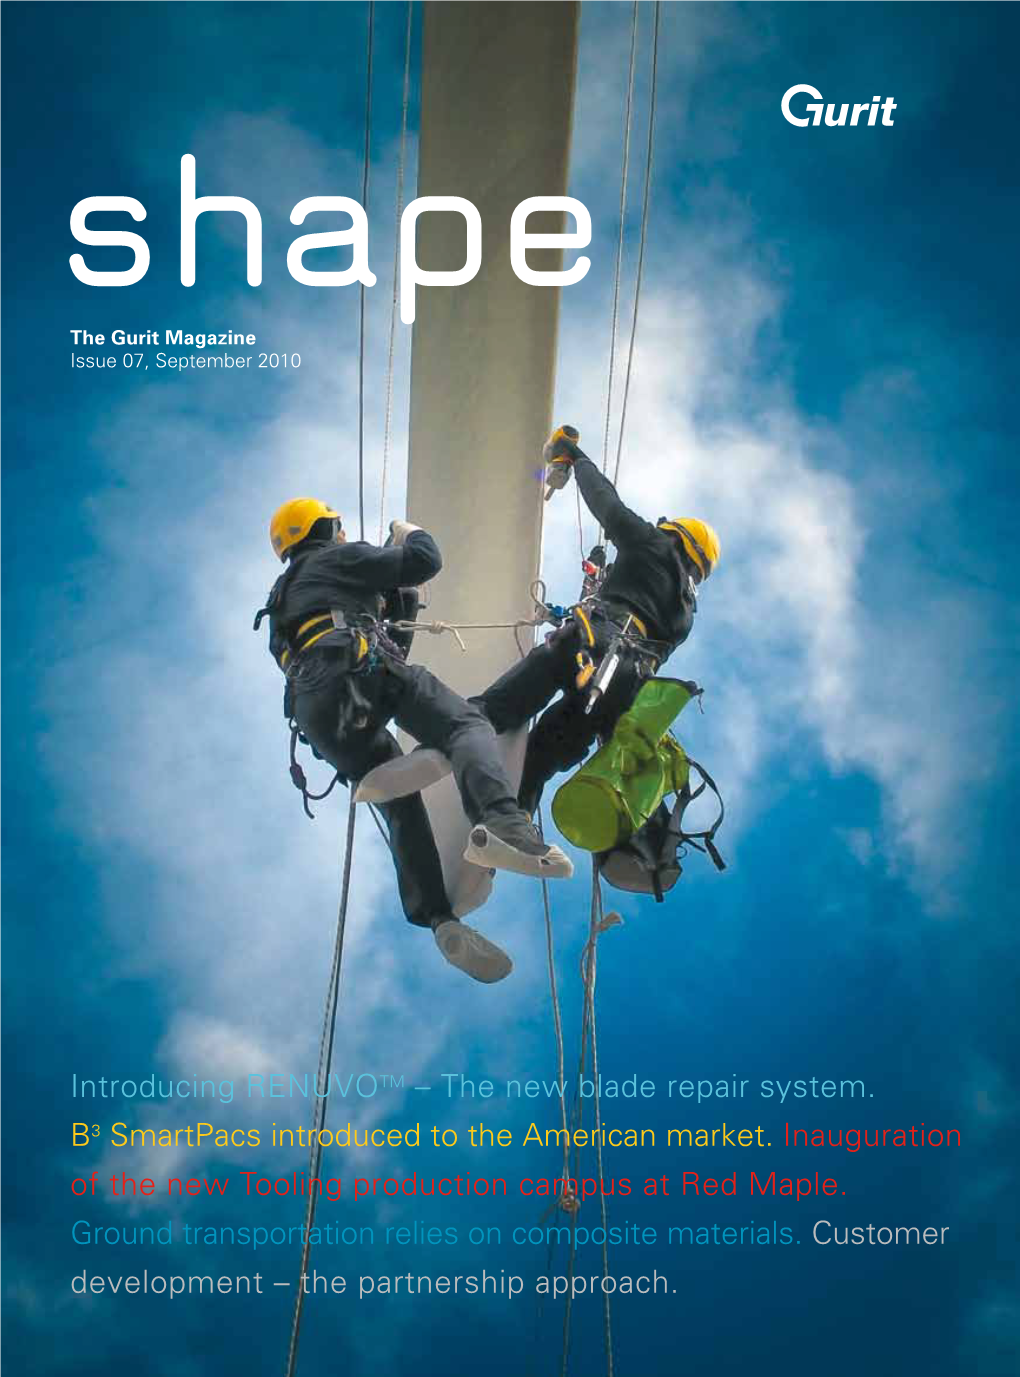 SHAPE Takes You on Tour Through the Gurit World, Discovering Just That: New Materials, New Markets, New Ways!